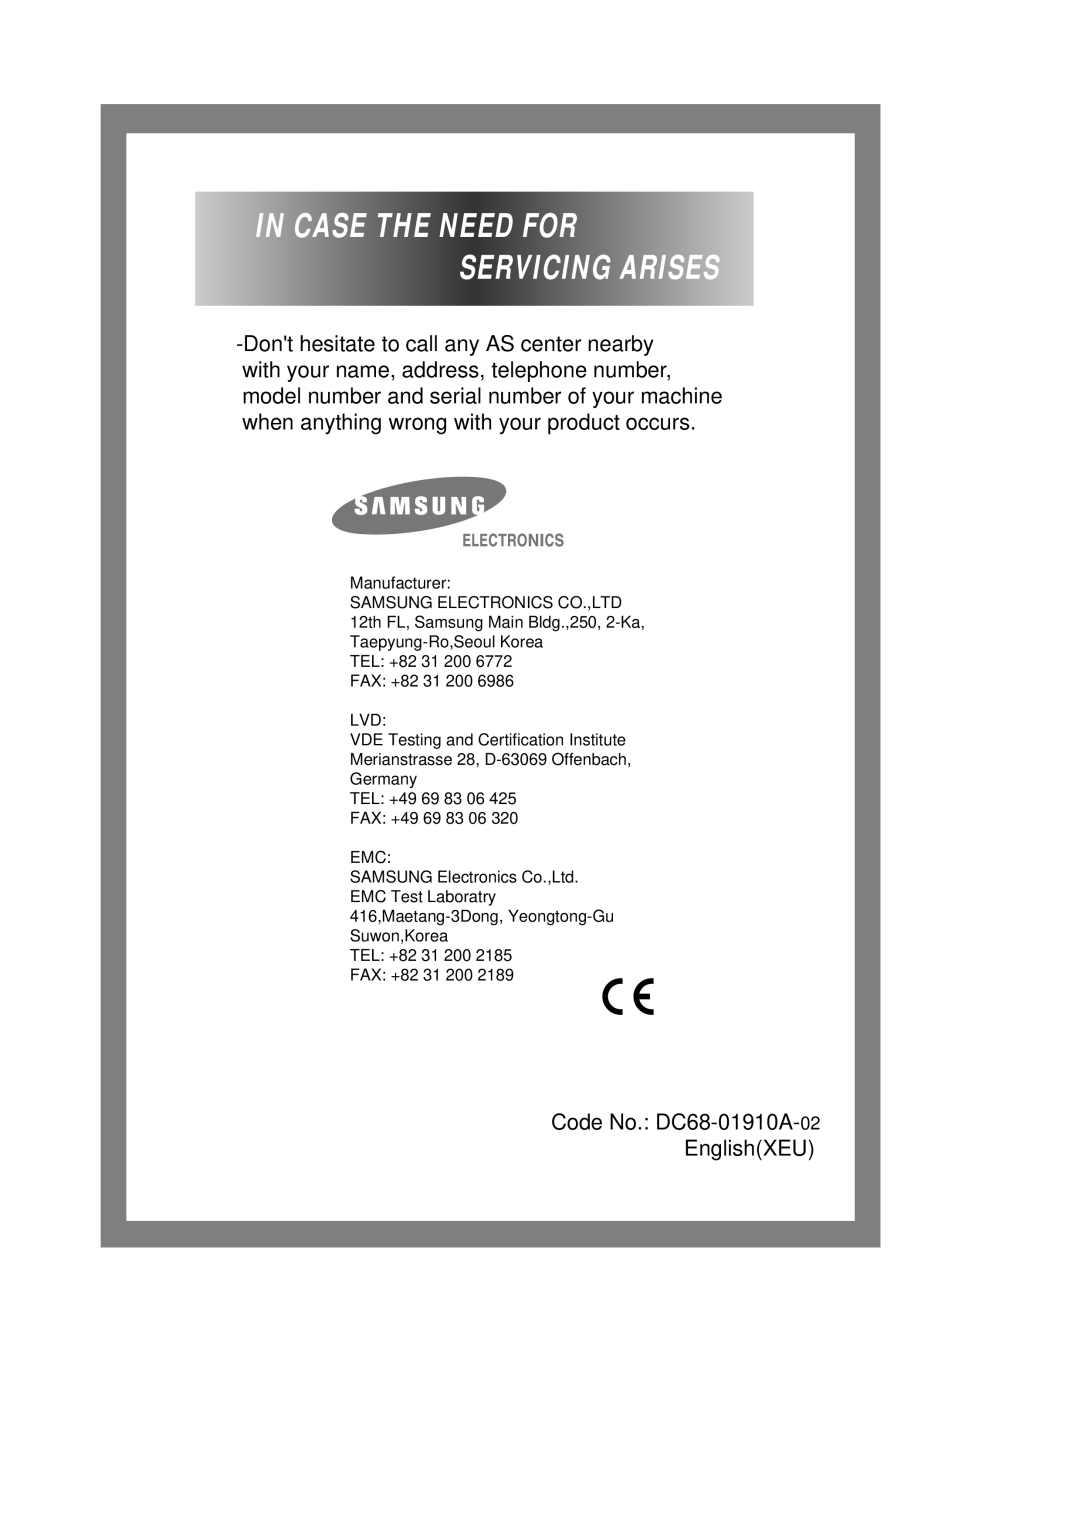 Samsung Q1433, Q1633, Q1233 manual In Case The Need For Servicing Arises 